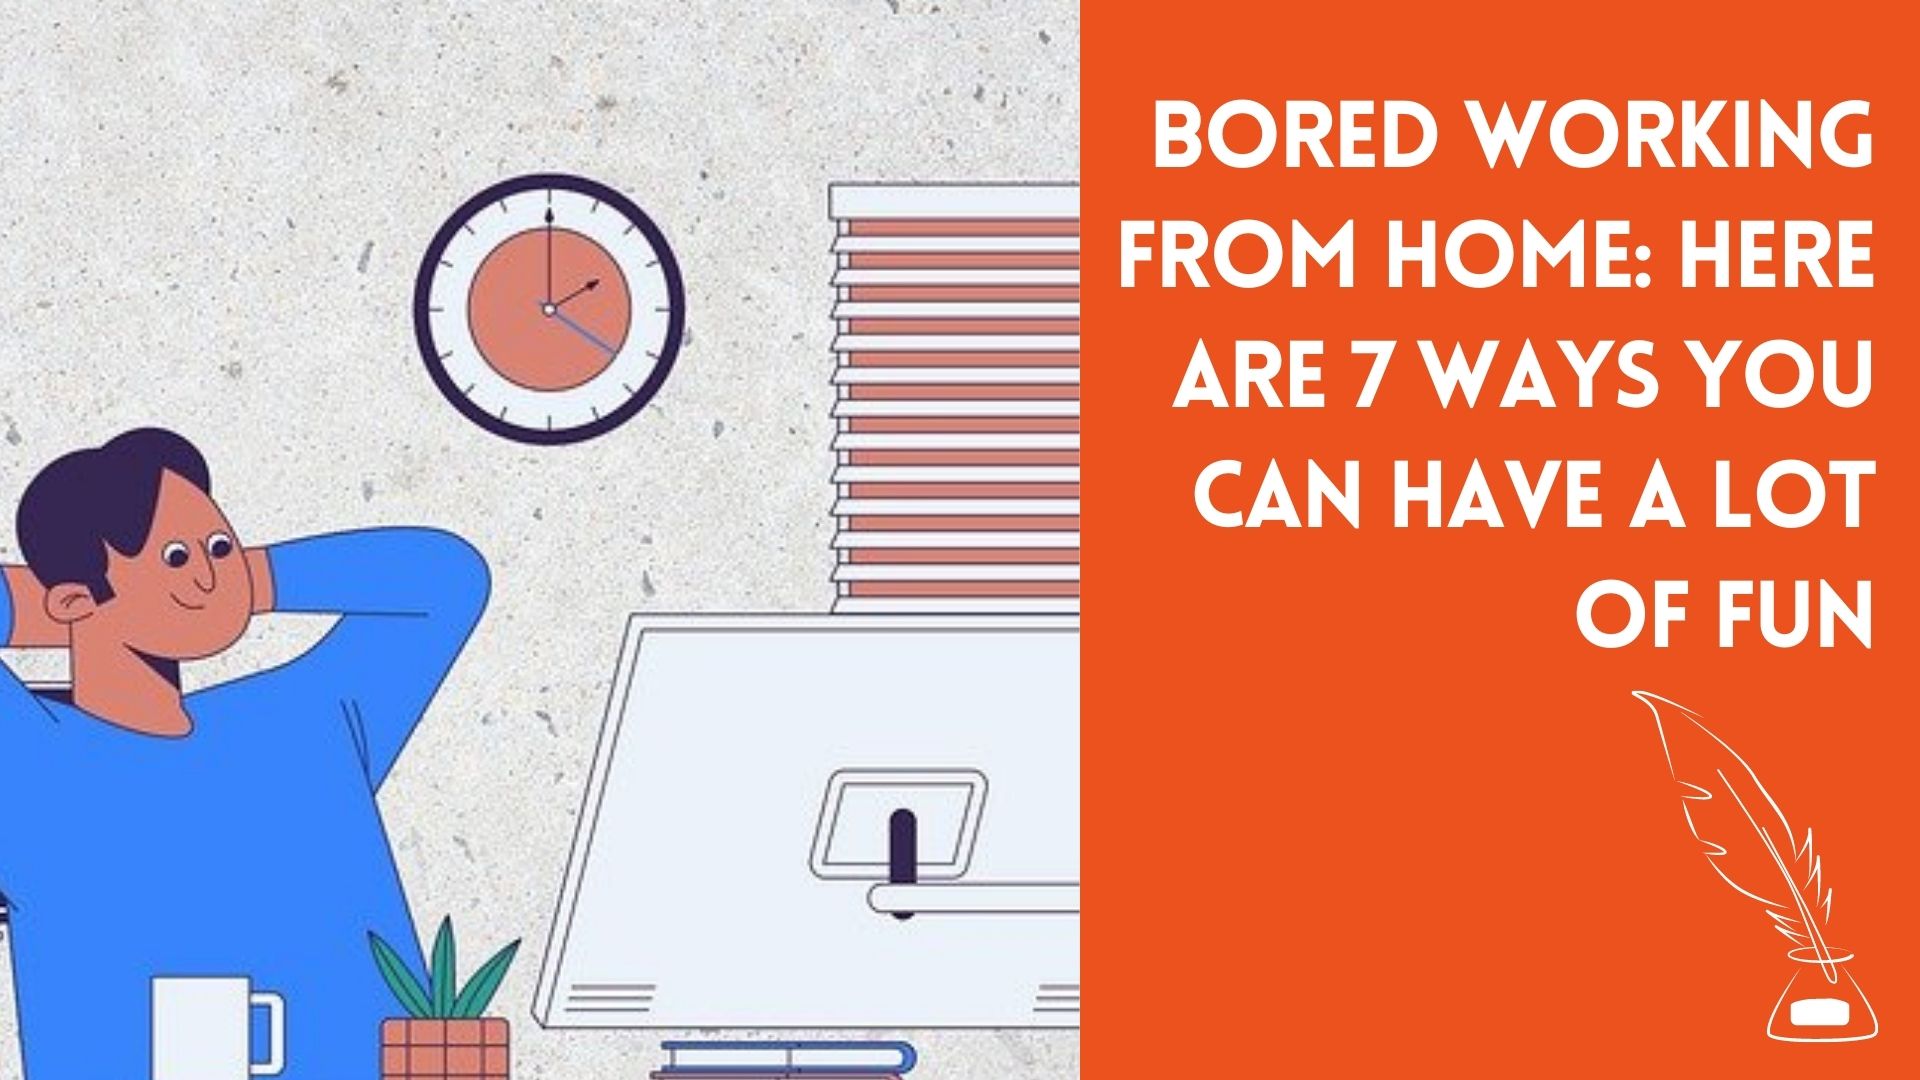 Bored Working From Home: Here Are 7 Ways You Can Have A Lot Of Fun